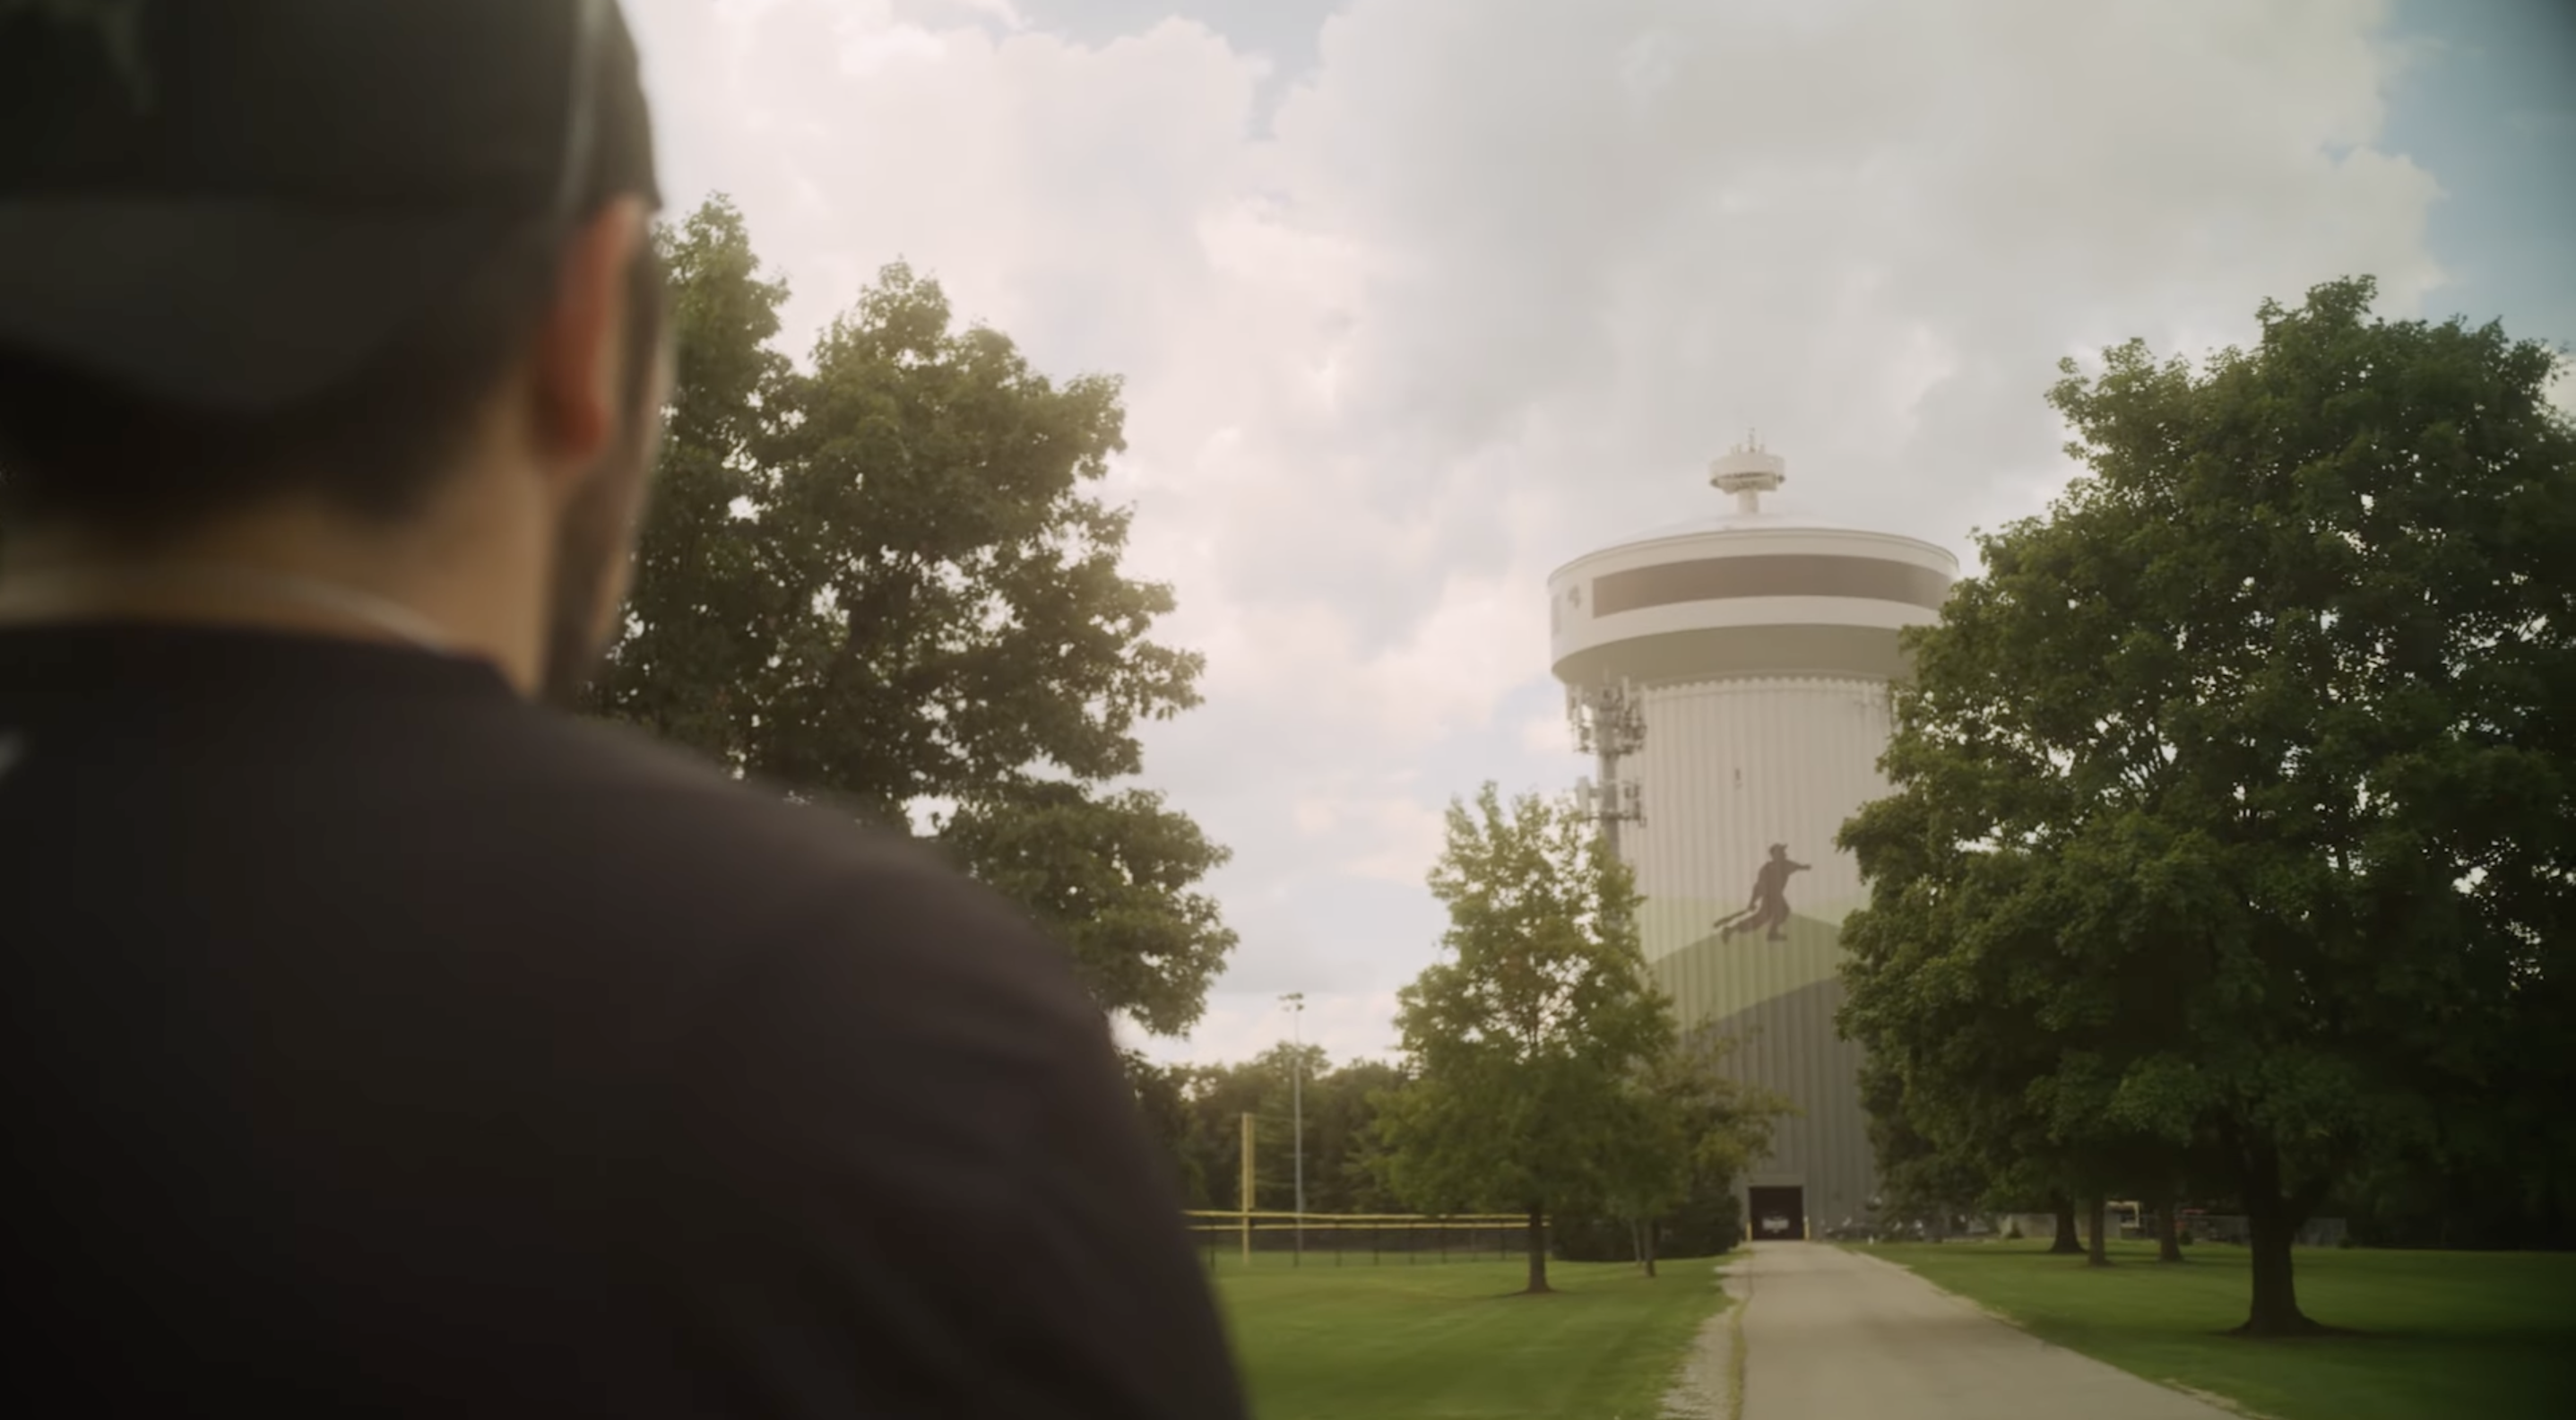 Curtis gazes at a water tower